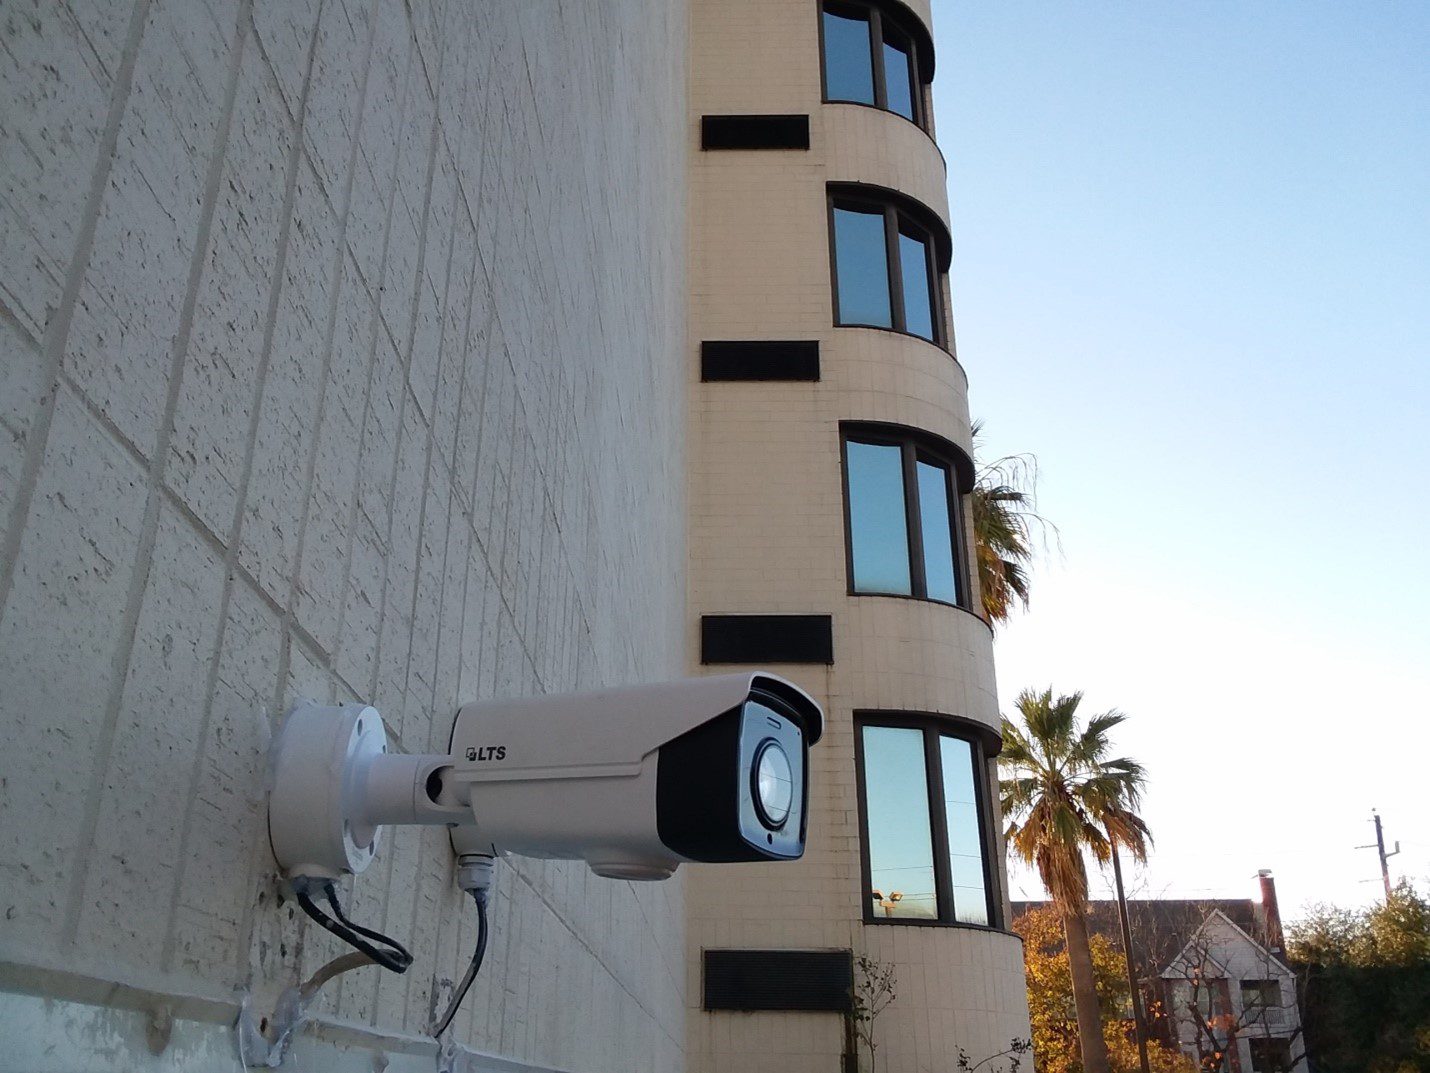 A white camera mounted to the side of a building.